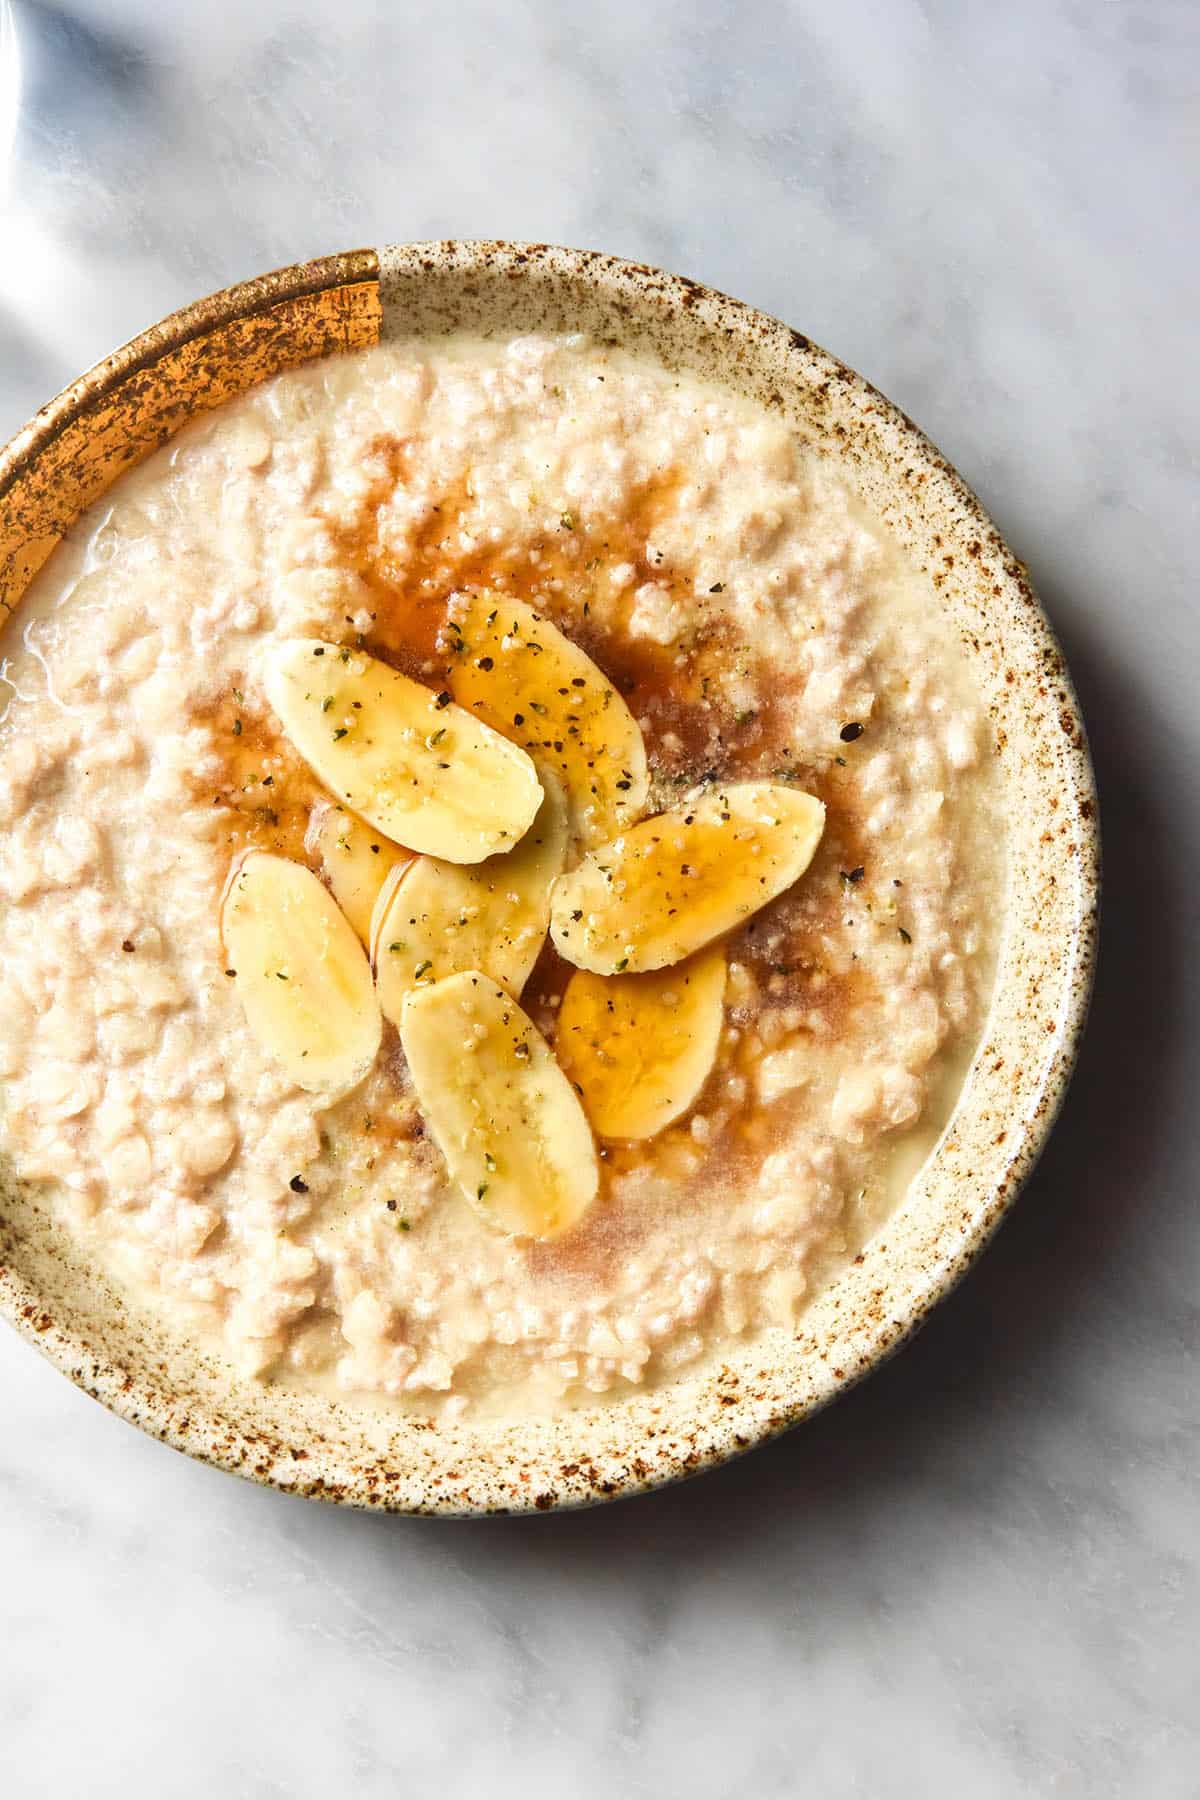 An aerial image of a speckled beige ceramic bowl filled with gluten free porridge that has been topped with banana coins, maple syrup and hemp seeds. The porridge sits atop a white marble table with water glasses off to the left hand side of the image